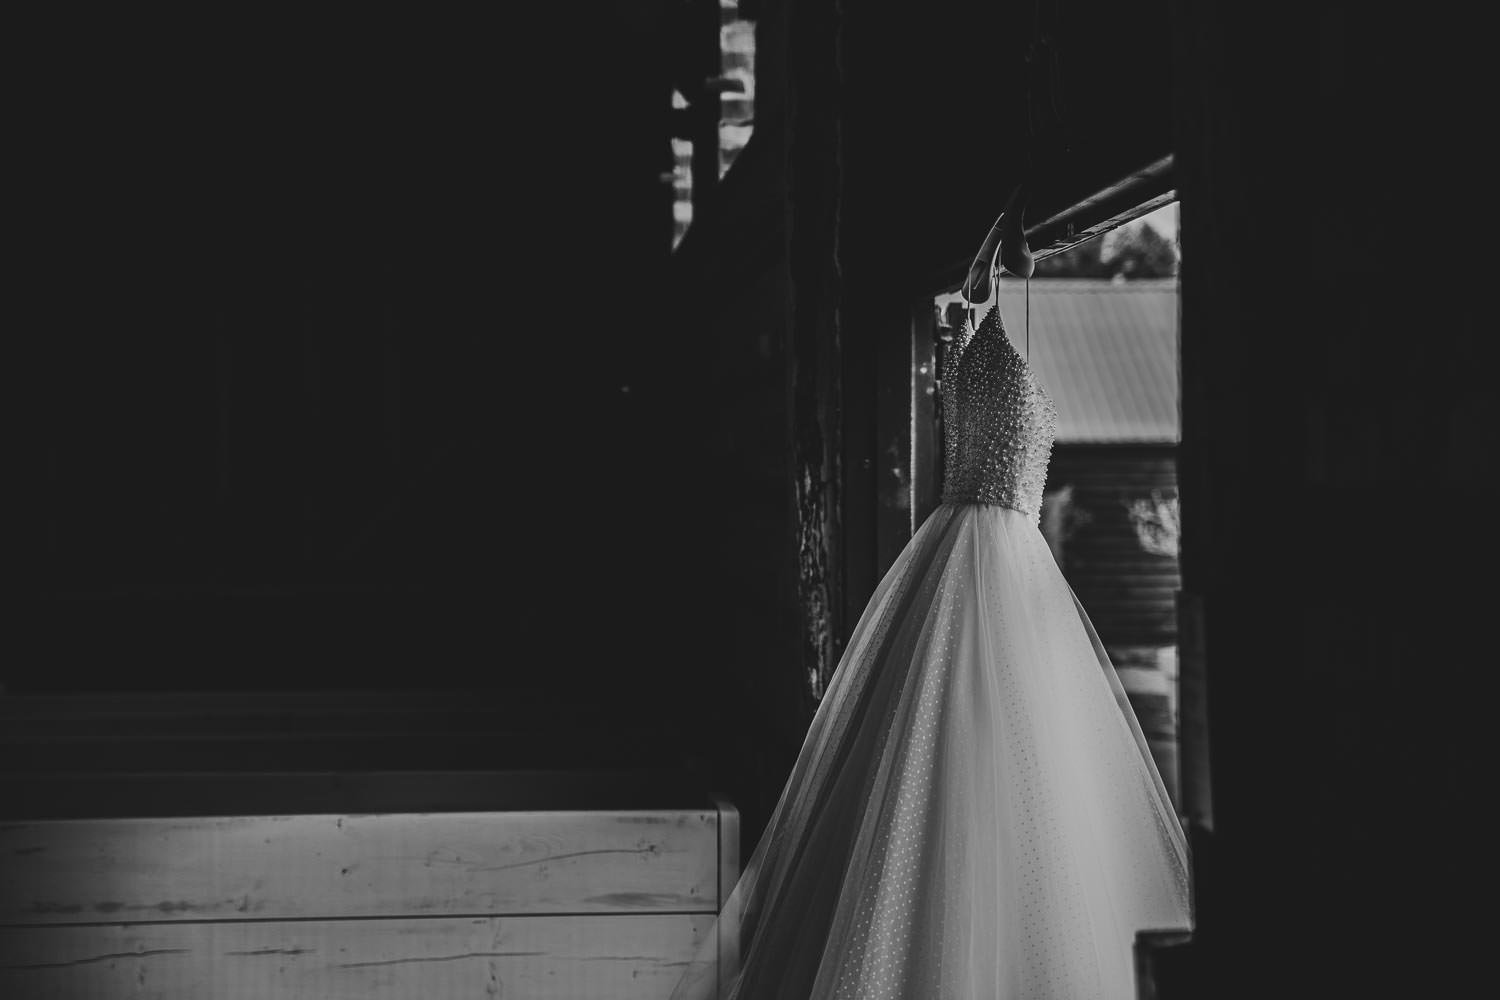 Wedding dress hanging on display in the Oak Barn at Milling Barn in Throcking in the 